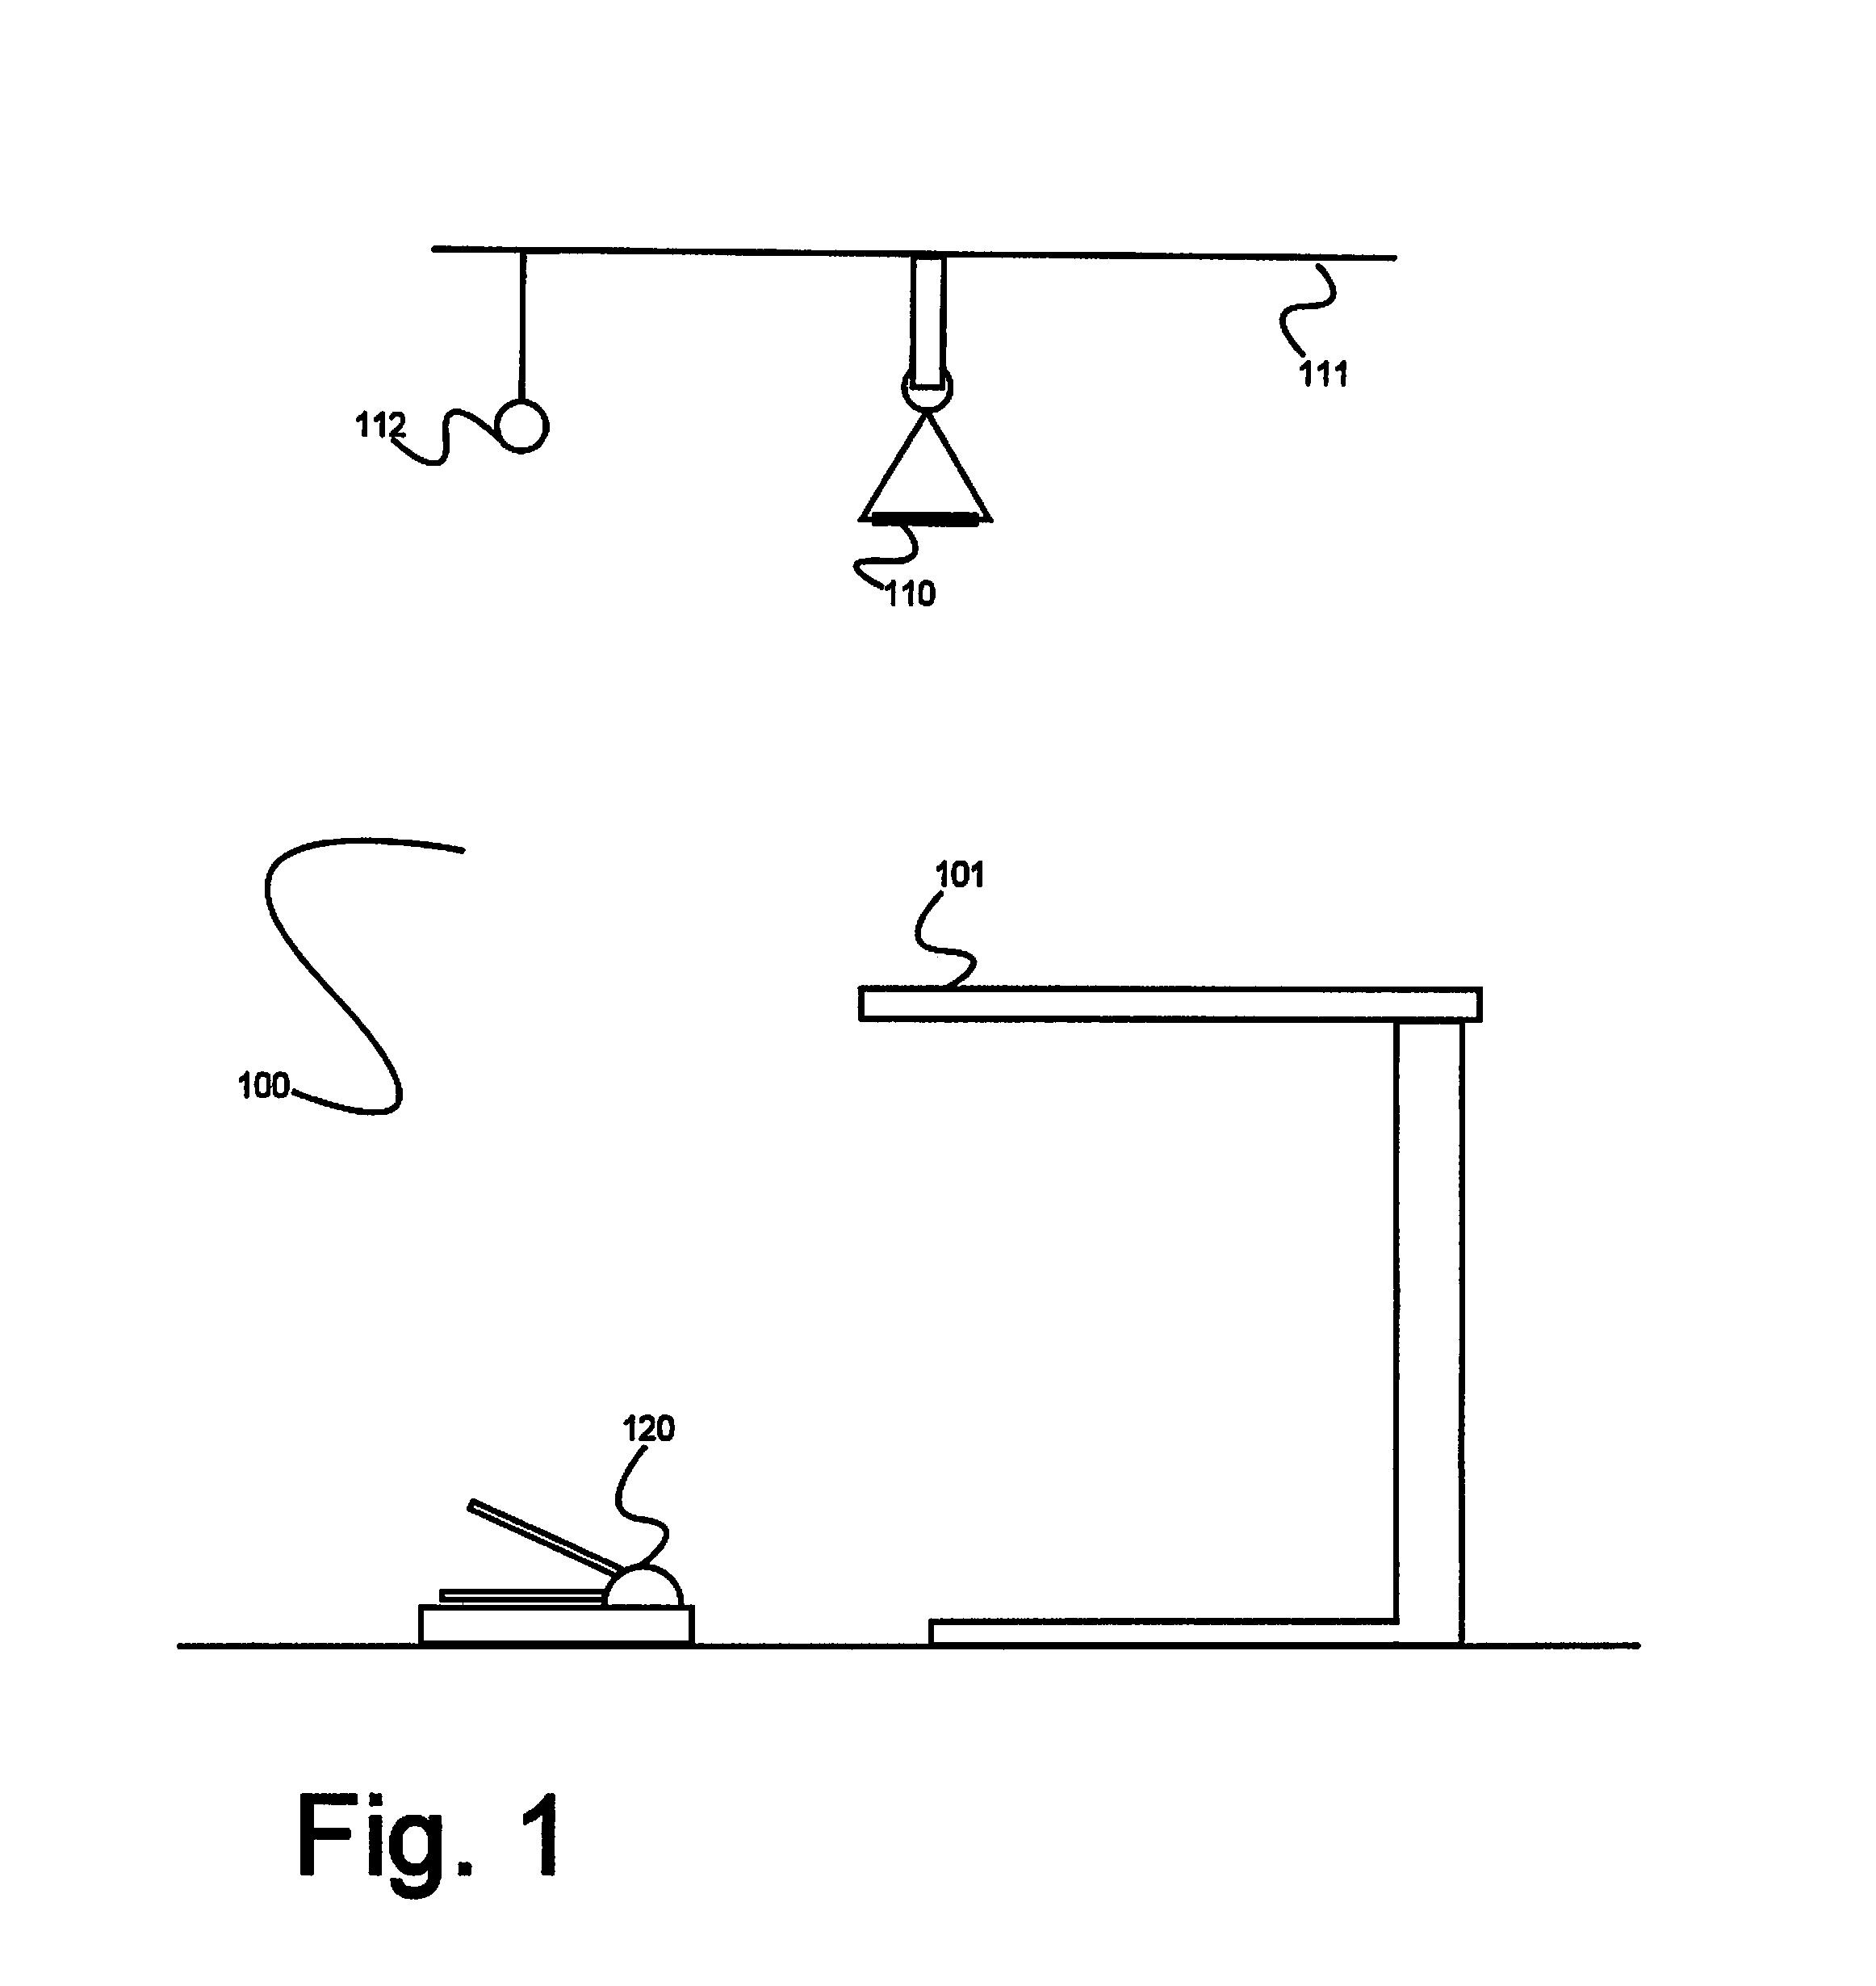 Method and apparatus for workspace ergonomics and fitness